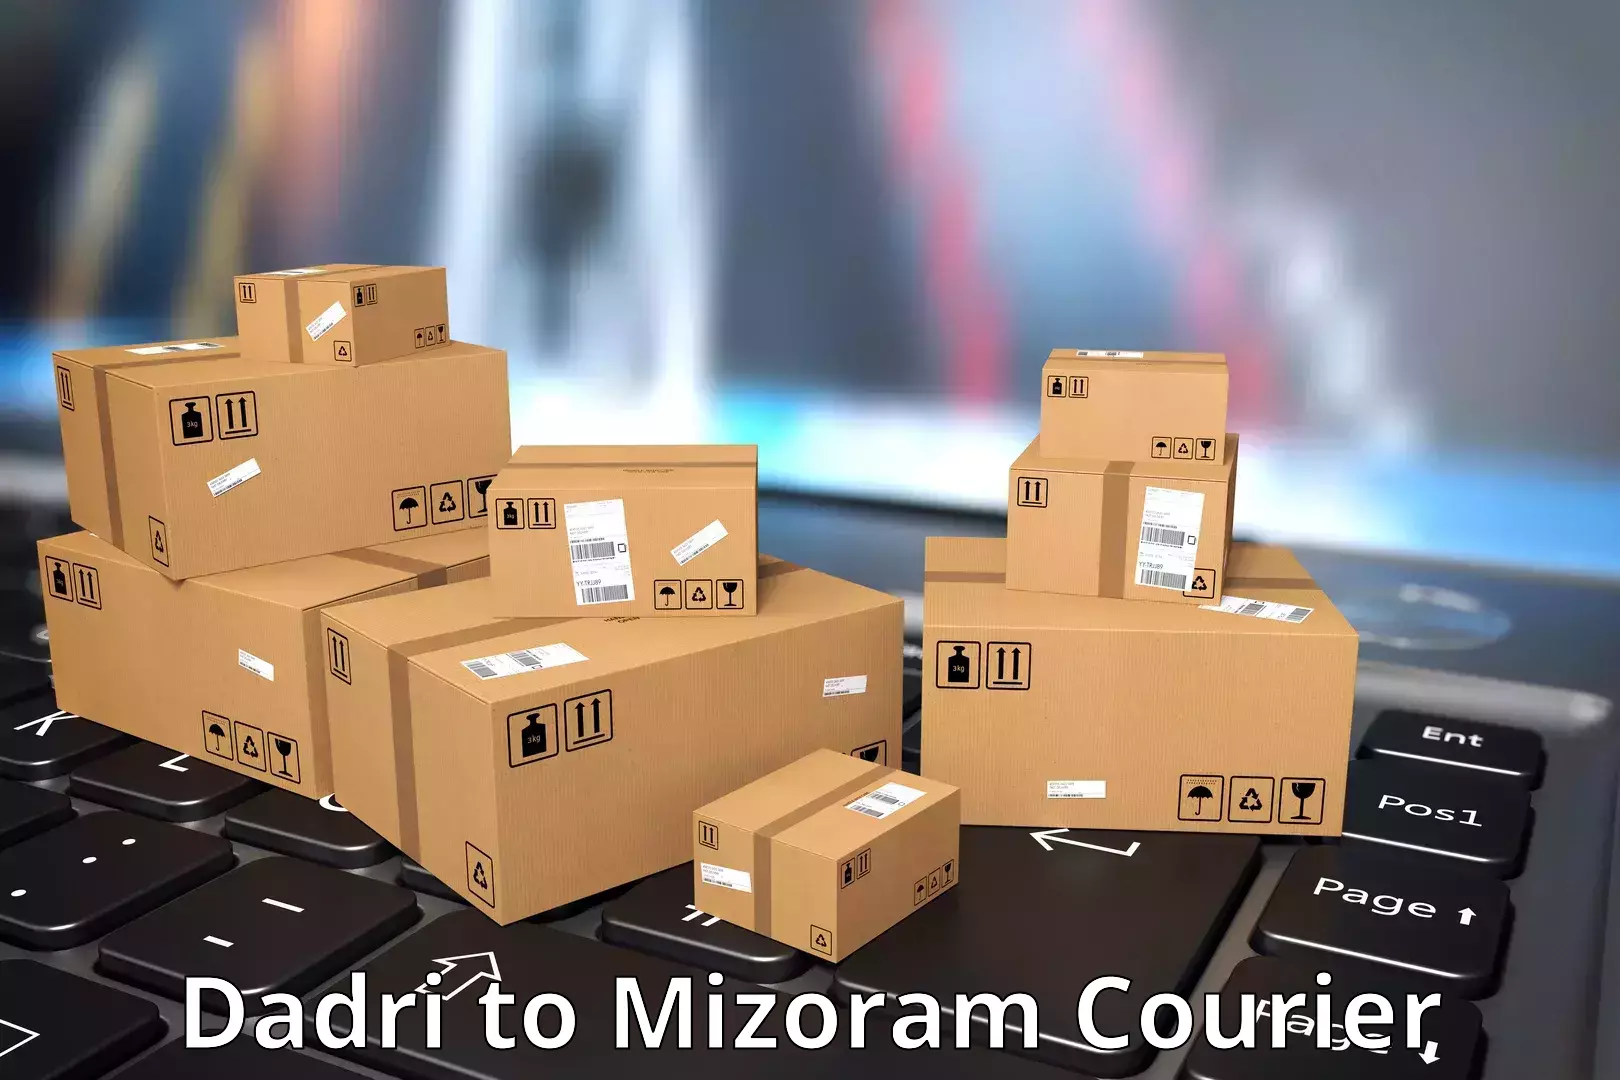 State-of-the-art courier technology Dadri to Mizoram